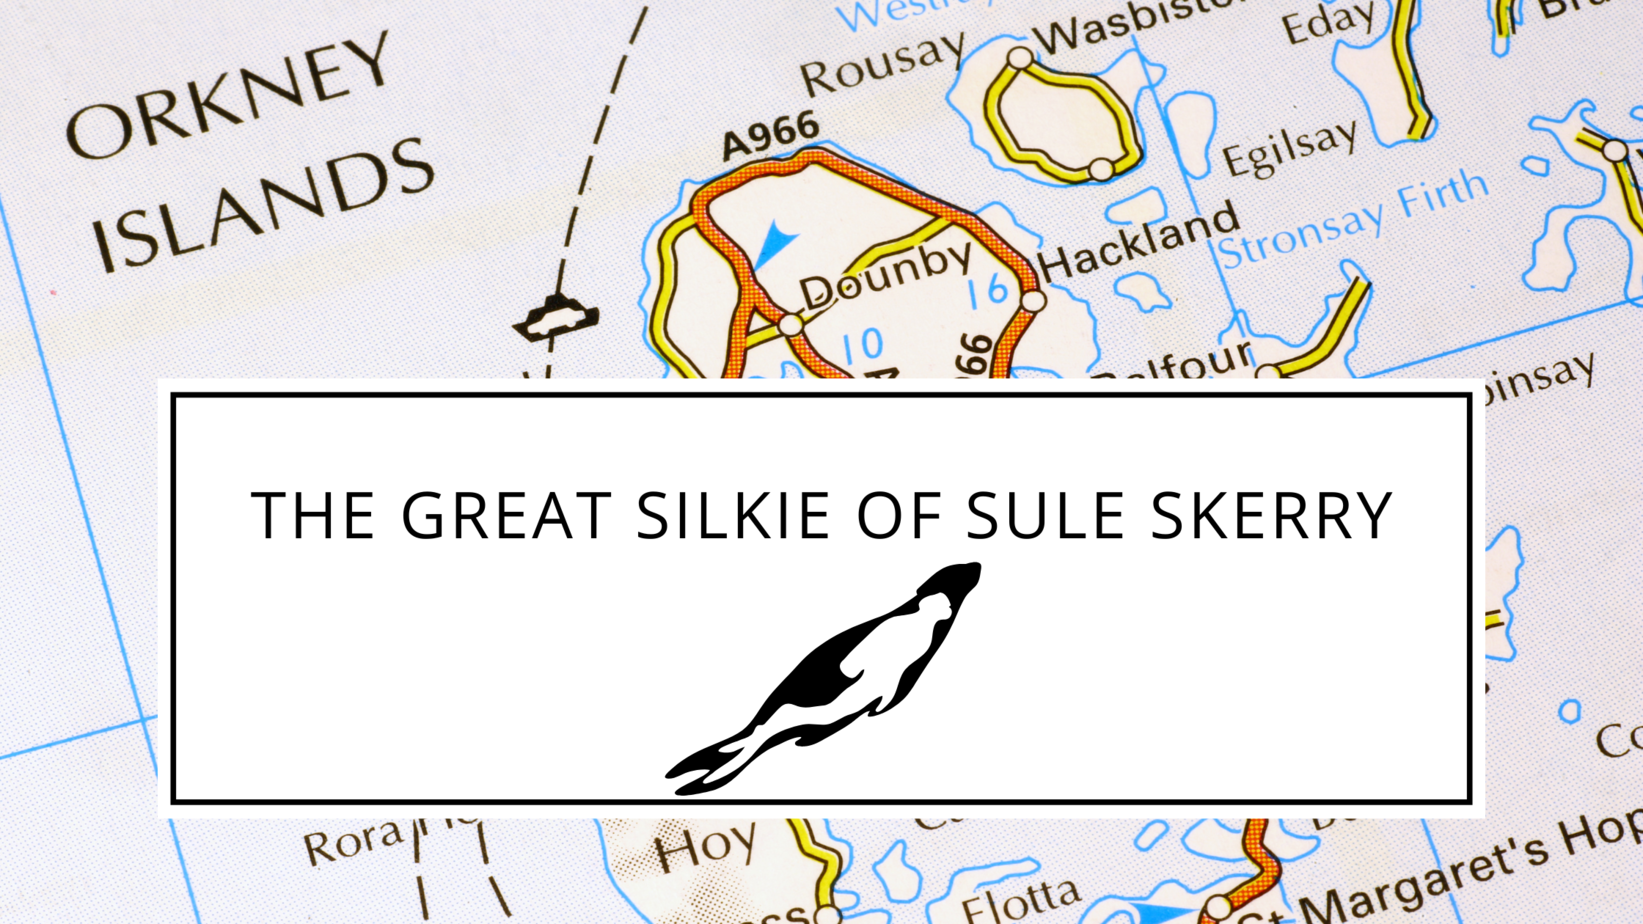 "The Great Silkie of Sule Skerry" 